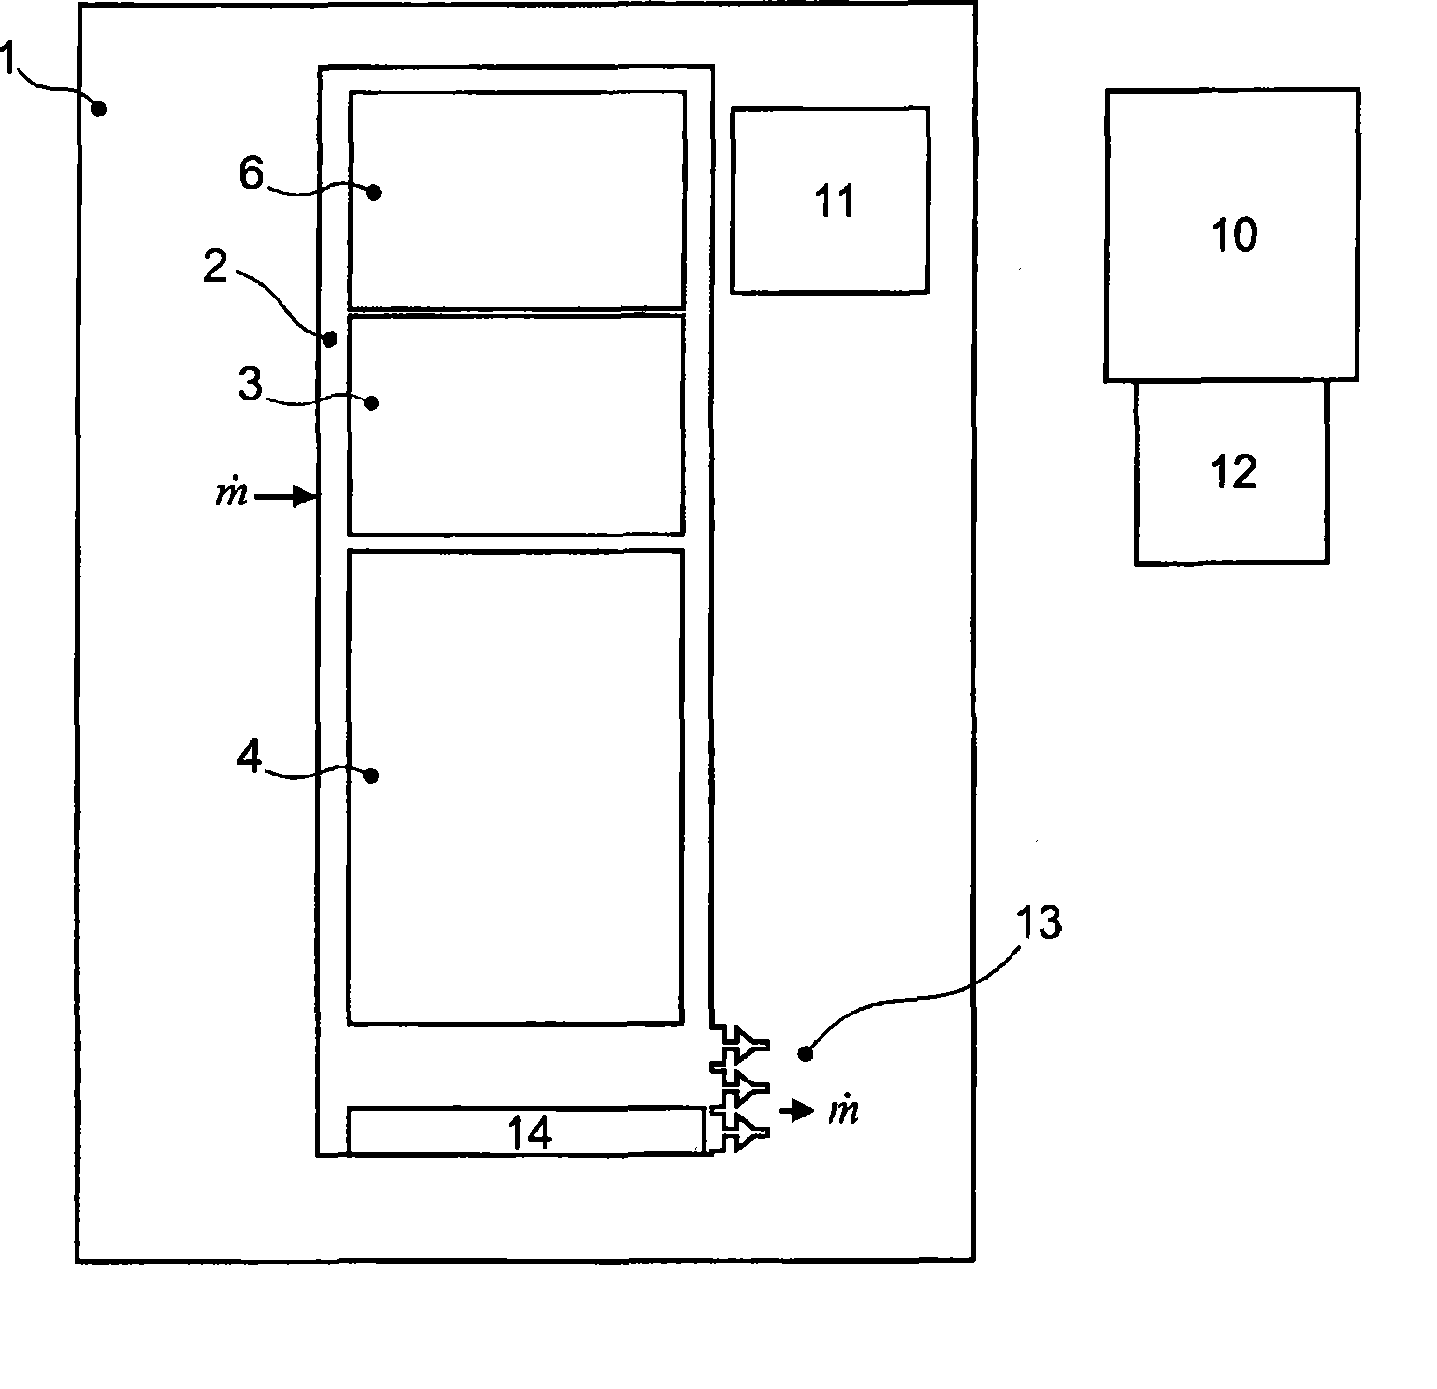 Oxygen supply system for generating oxygen from cabin air inan aircraft